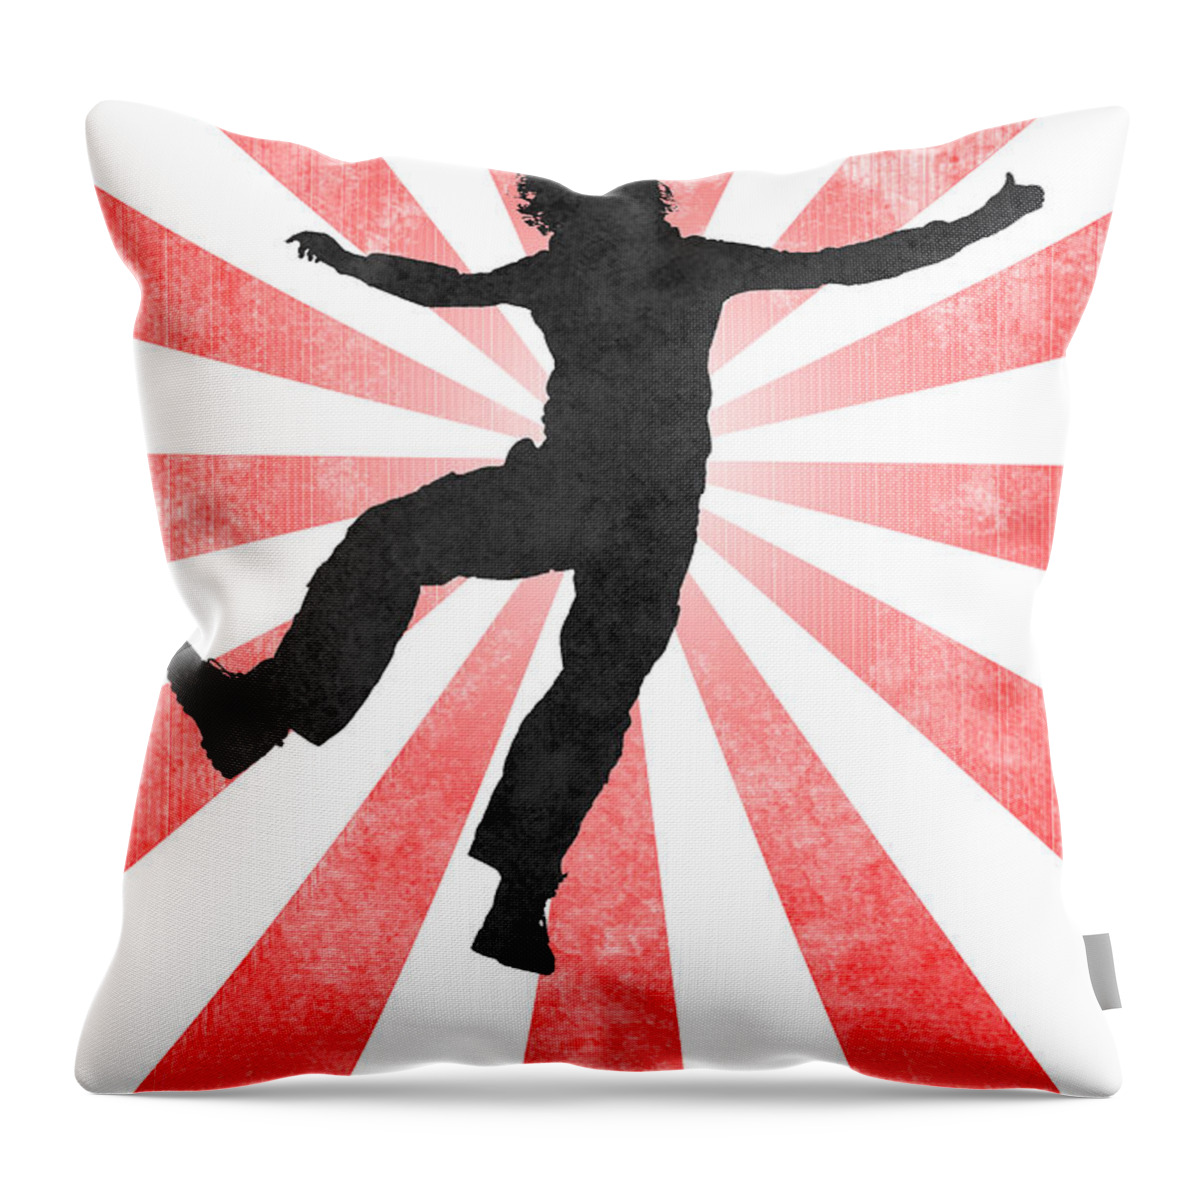 Yippie Throw Pillow featuring the photograph Yippee by Hannes Cmarits